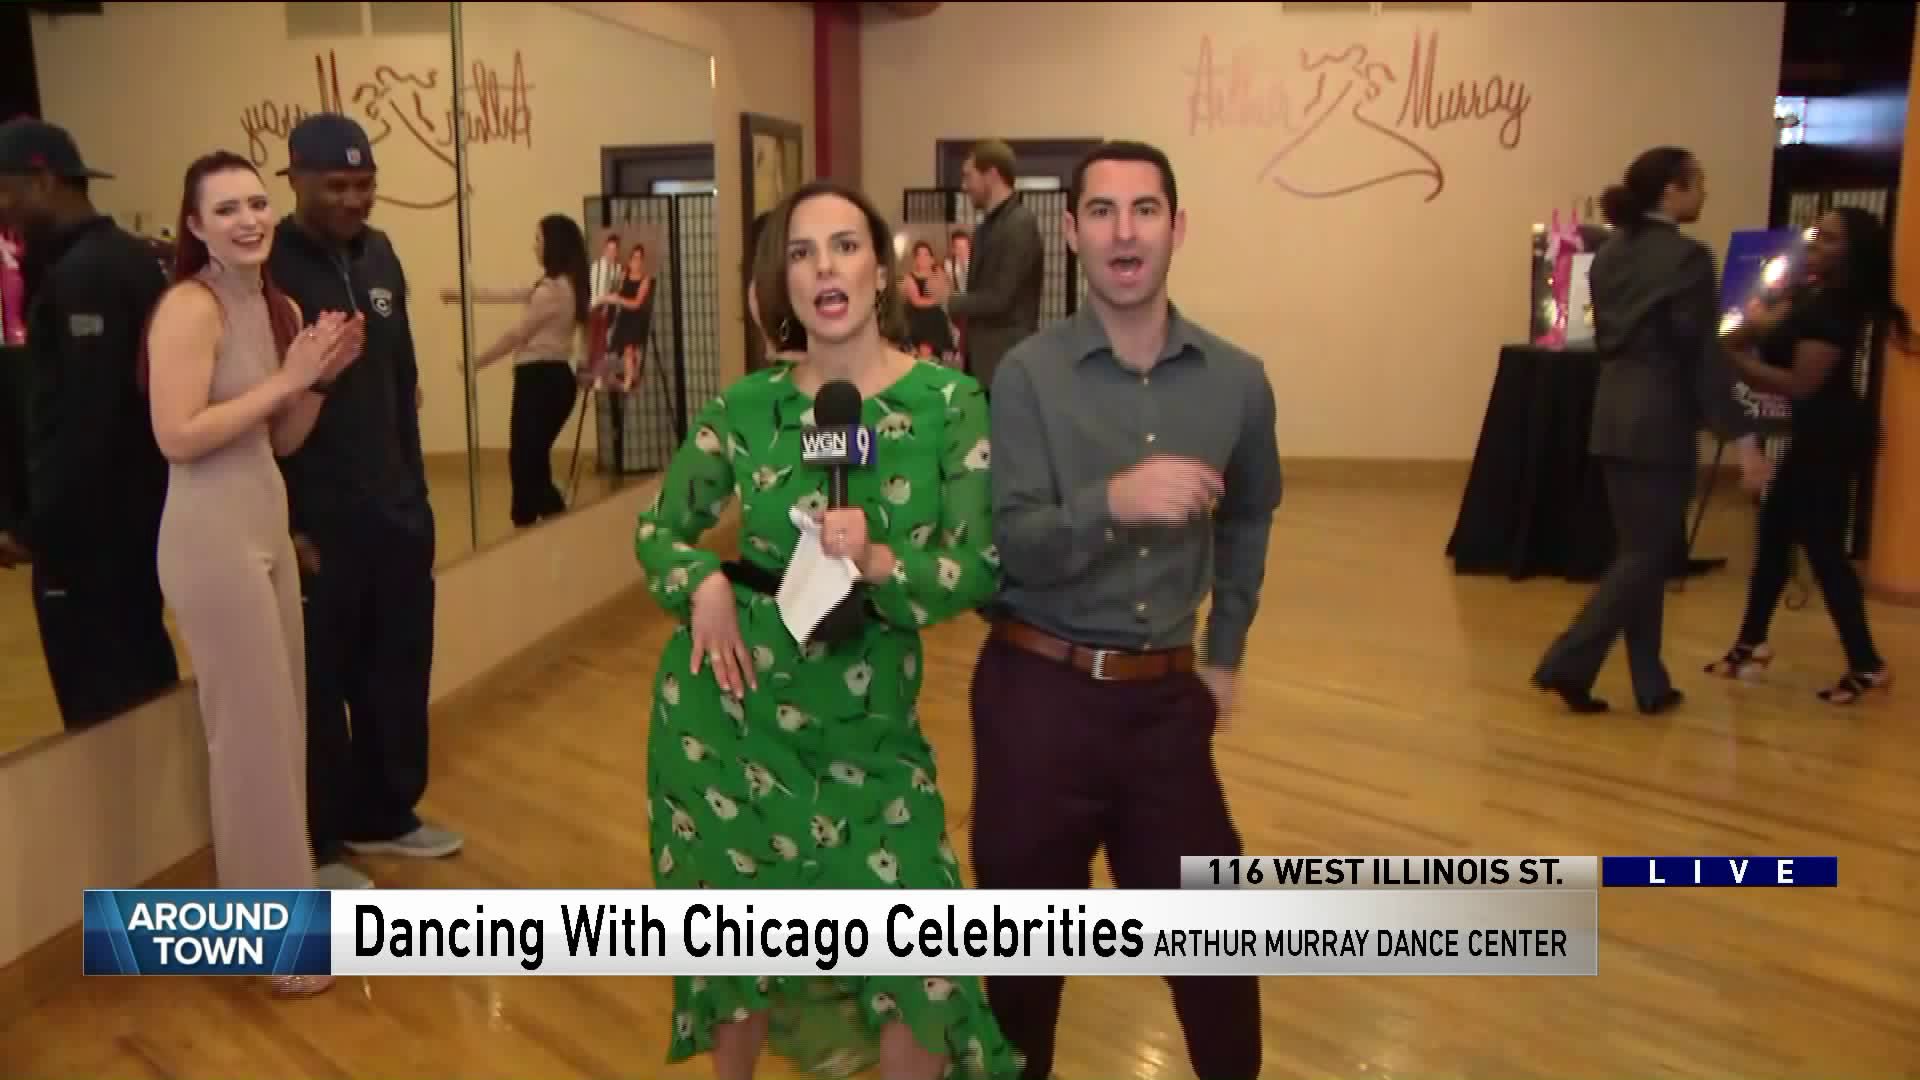 Around Town previews a dance rehearsal for the annual Dancing With Chicago Celebrities